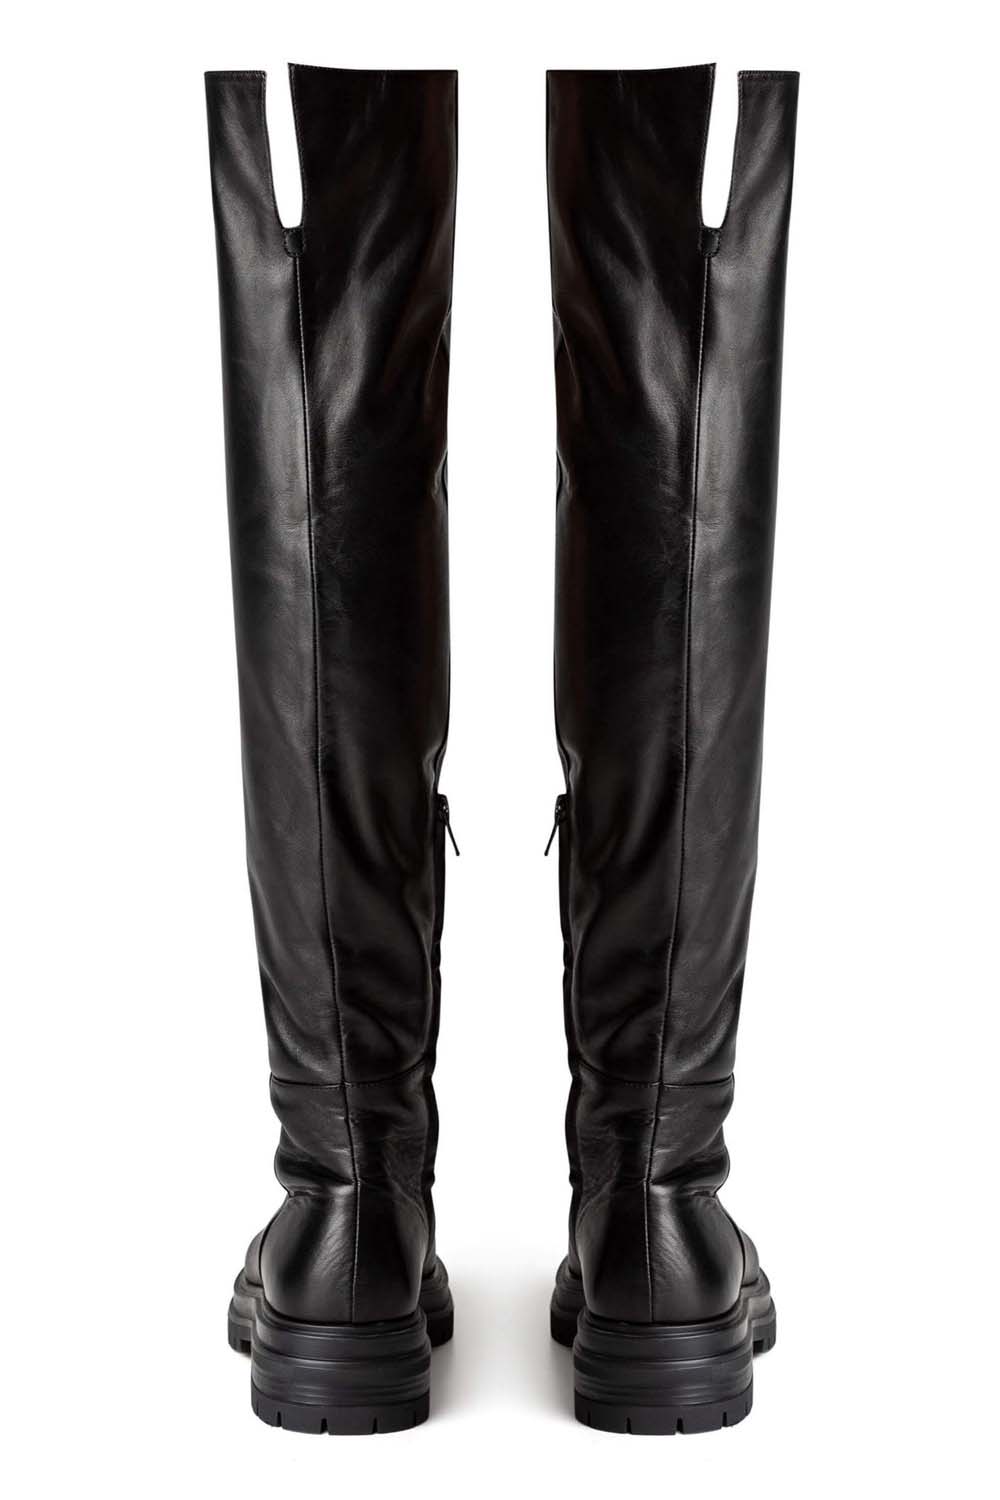 Tony Bianco Womens Over The Knee Boots Discount - Black Windy 4.5cm